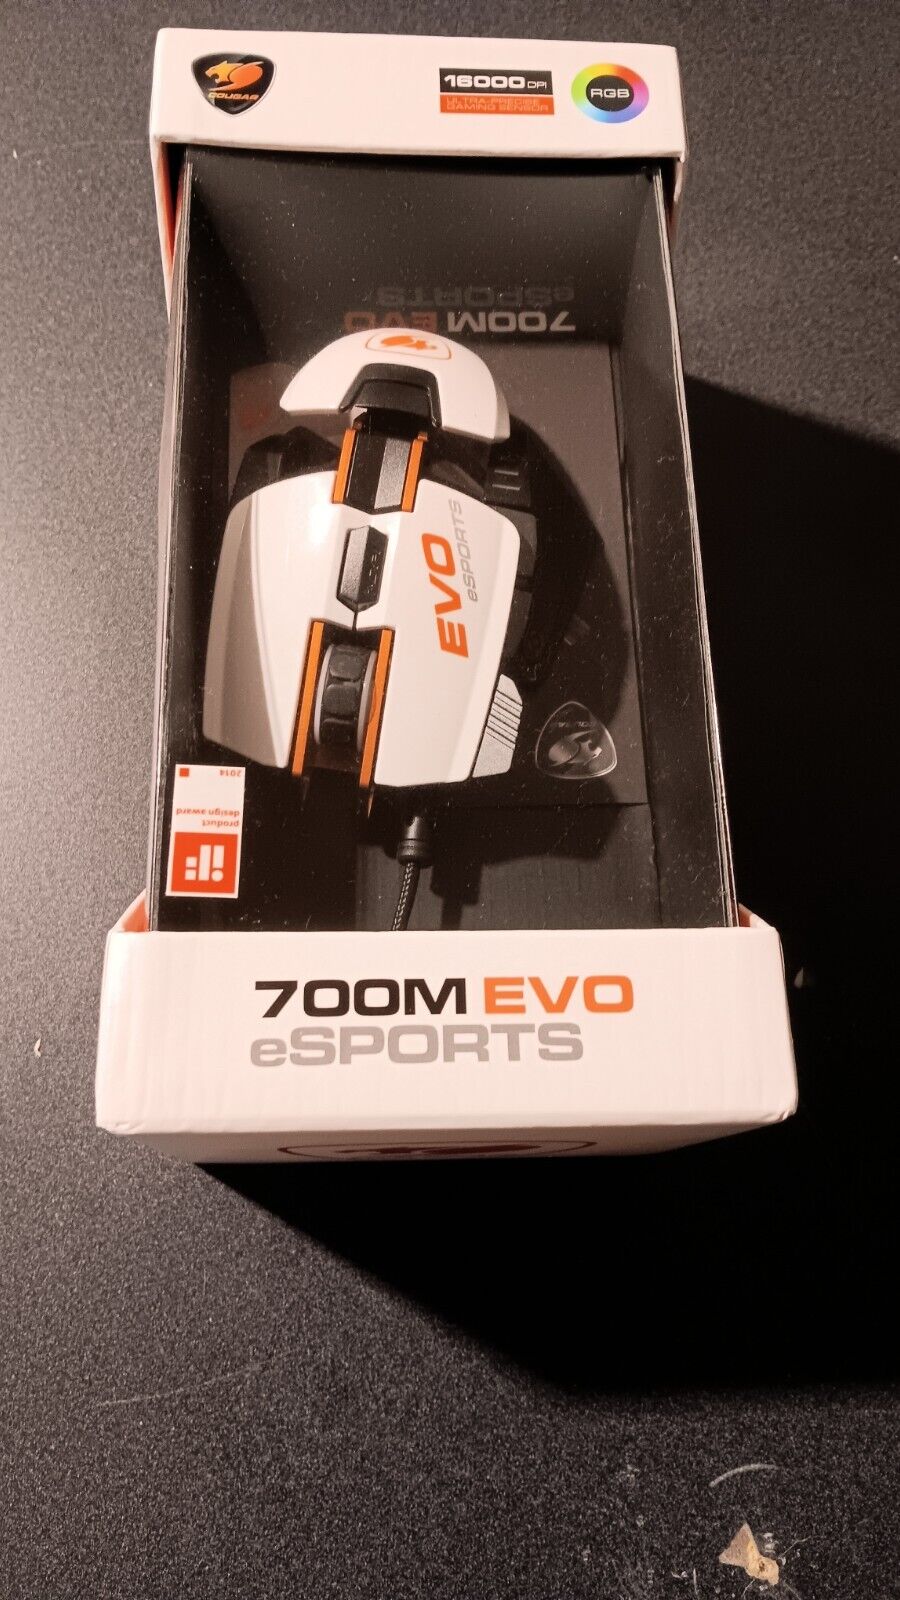 Cougar 700M EVO eSPORTS GAMING MOUSE